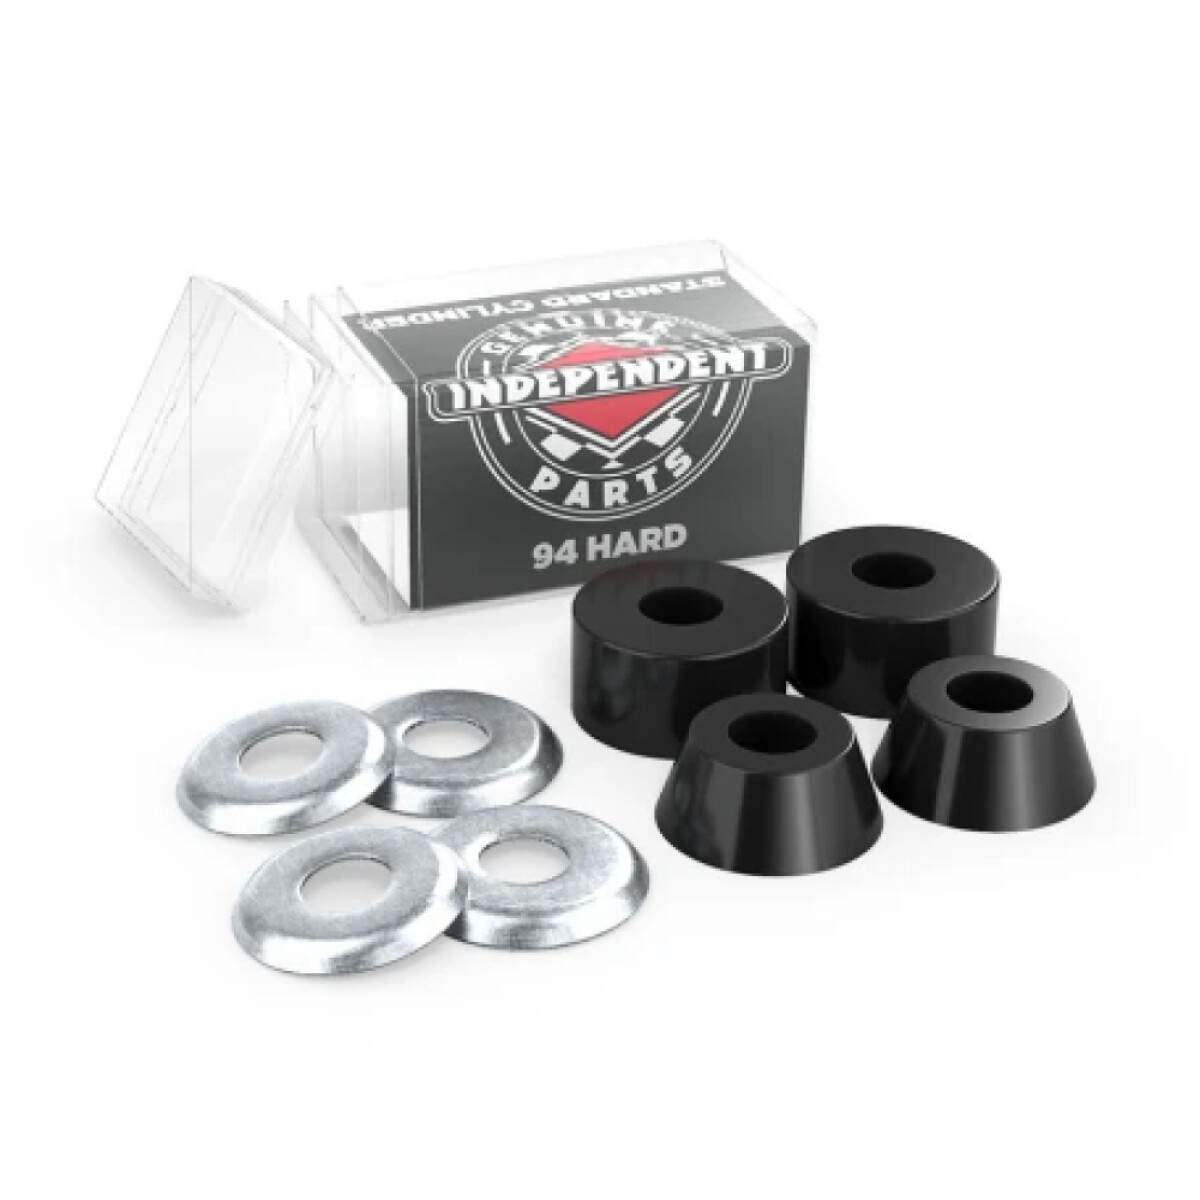 Bushings Independent Hard 94A 